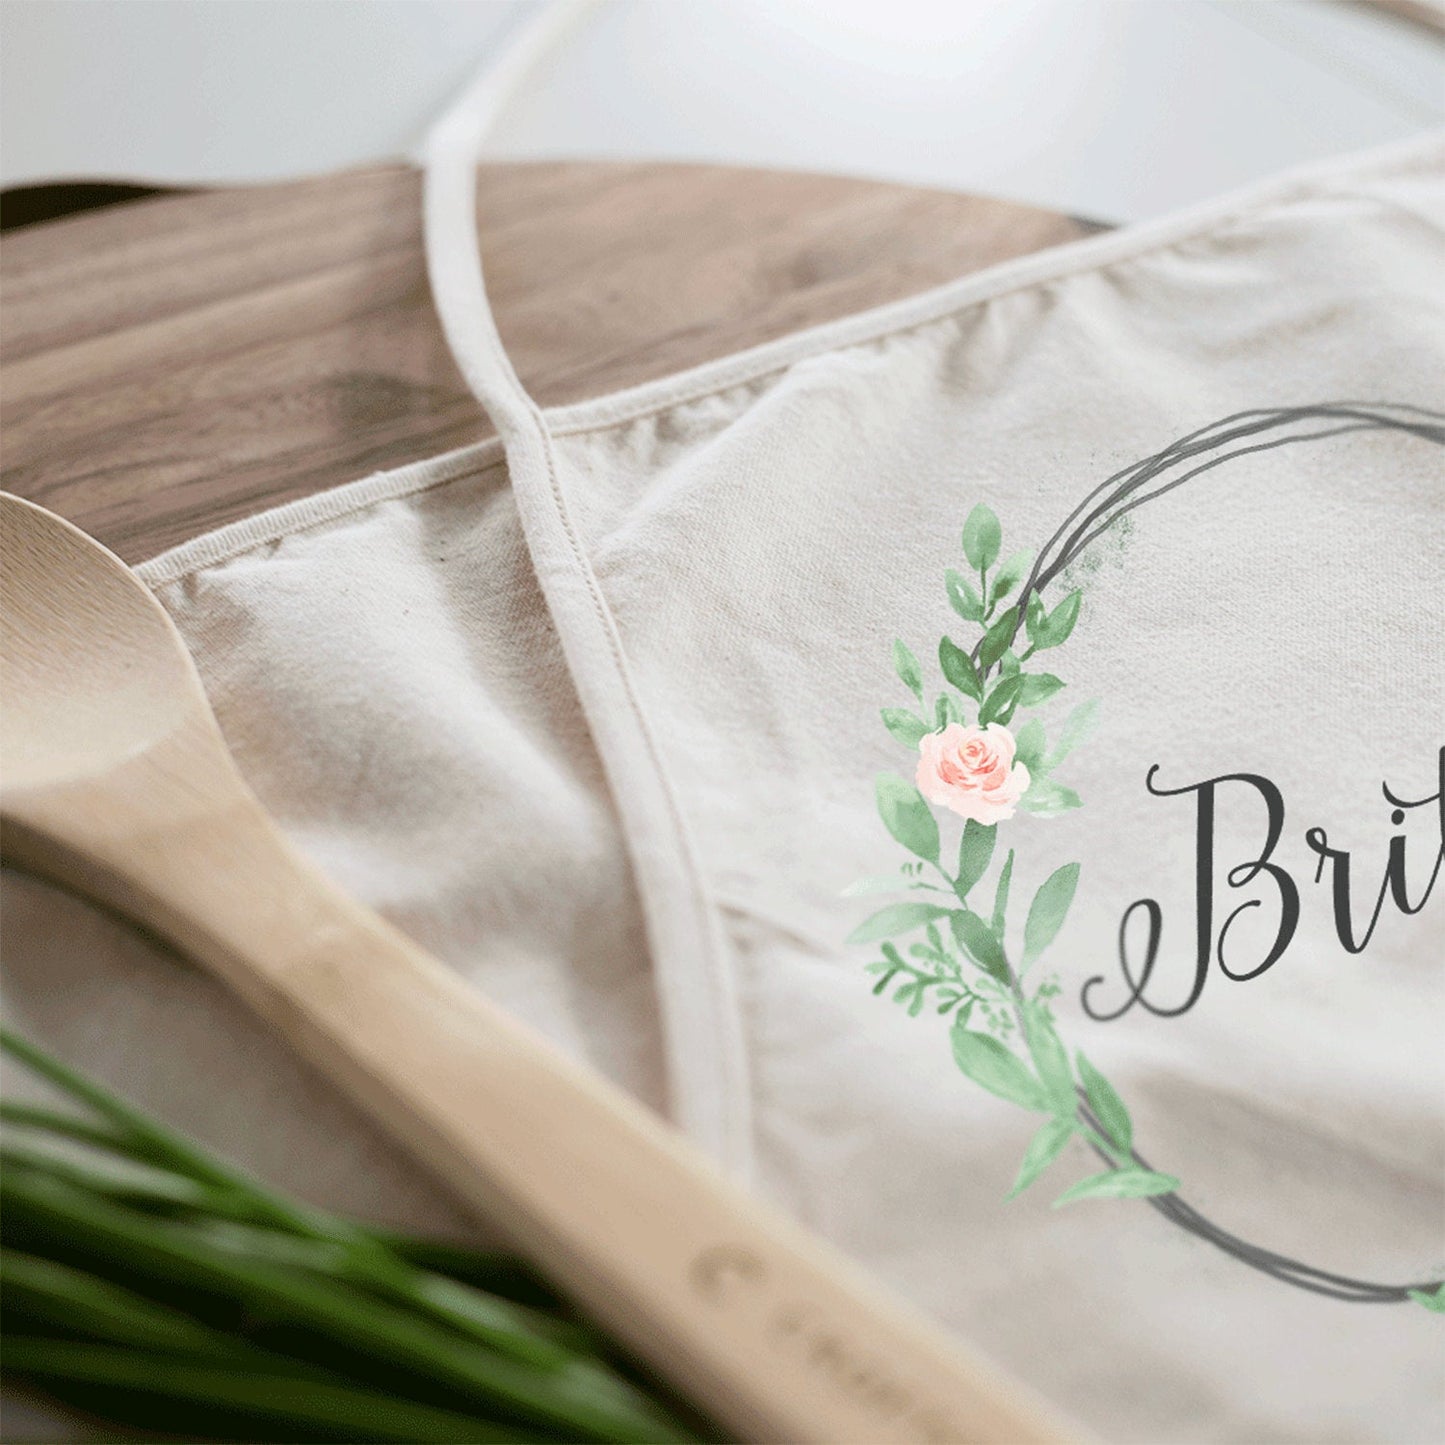 Load image into Gallery viewer, Personalized Apron For Mom | Kitchen Apron | Custom Apron | Kitchen Apron | Custom Monogram Apron | Cotton Canvas Full Apron | Gift for Mom
